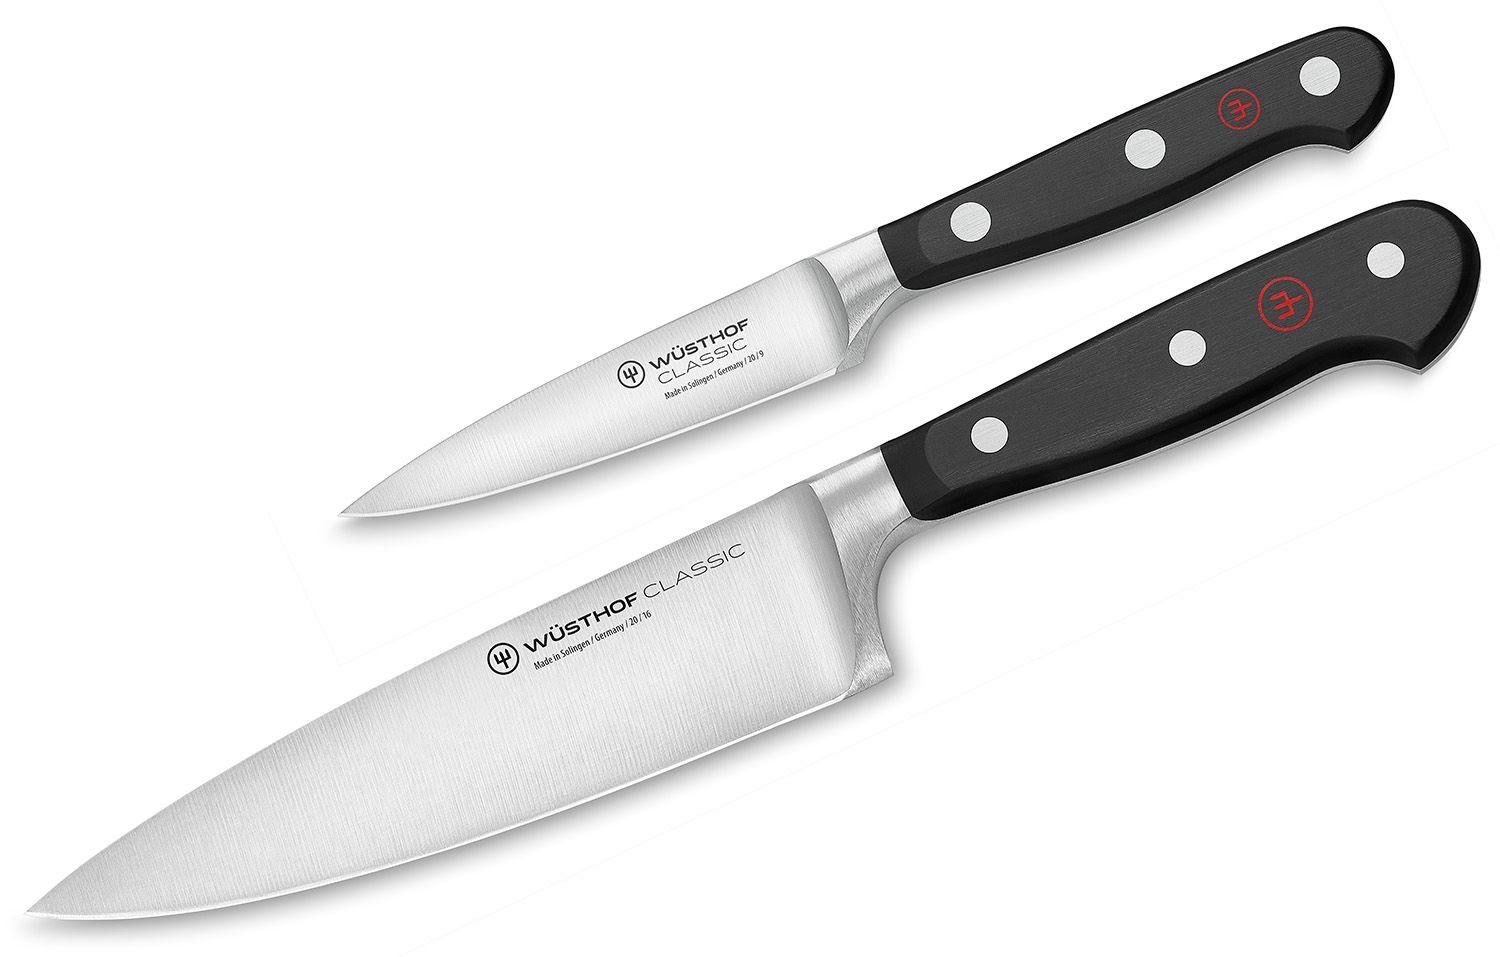 Classic 2-Piece Chef and Paring Set